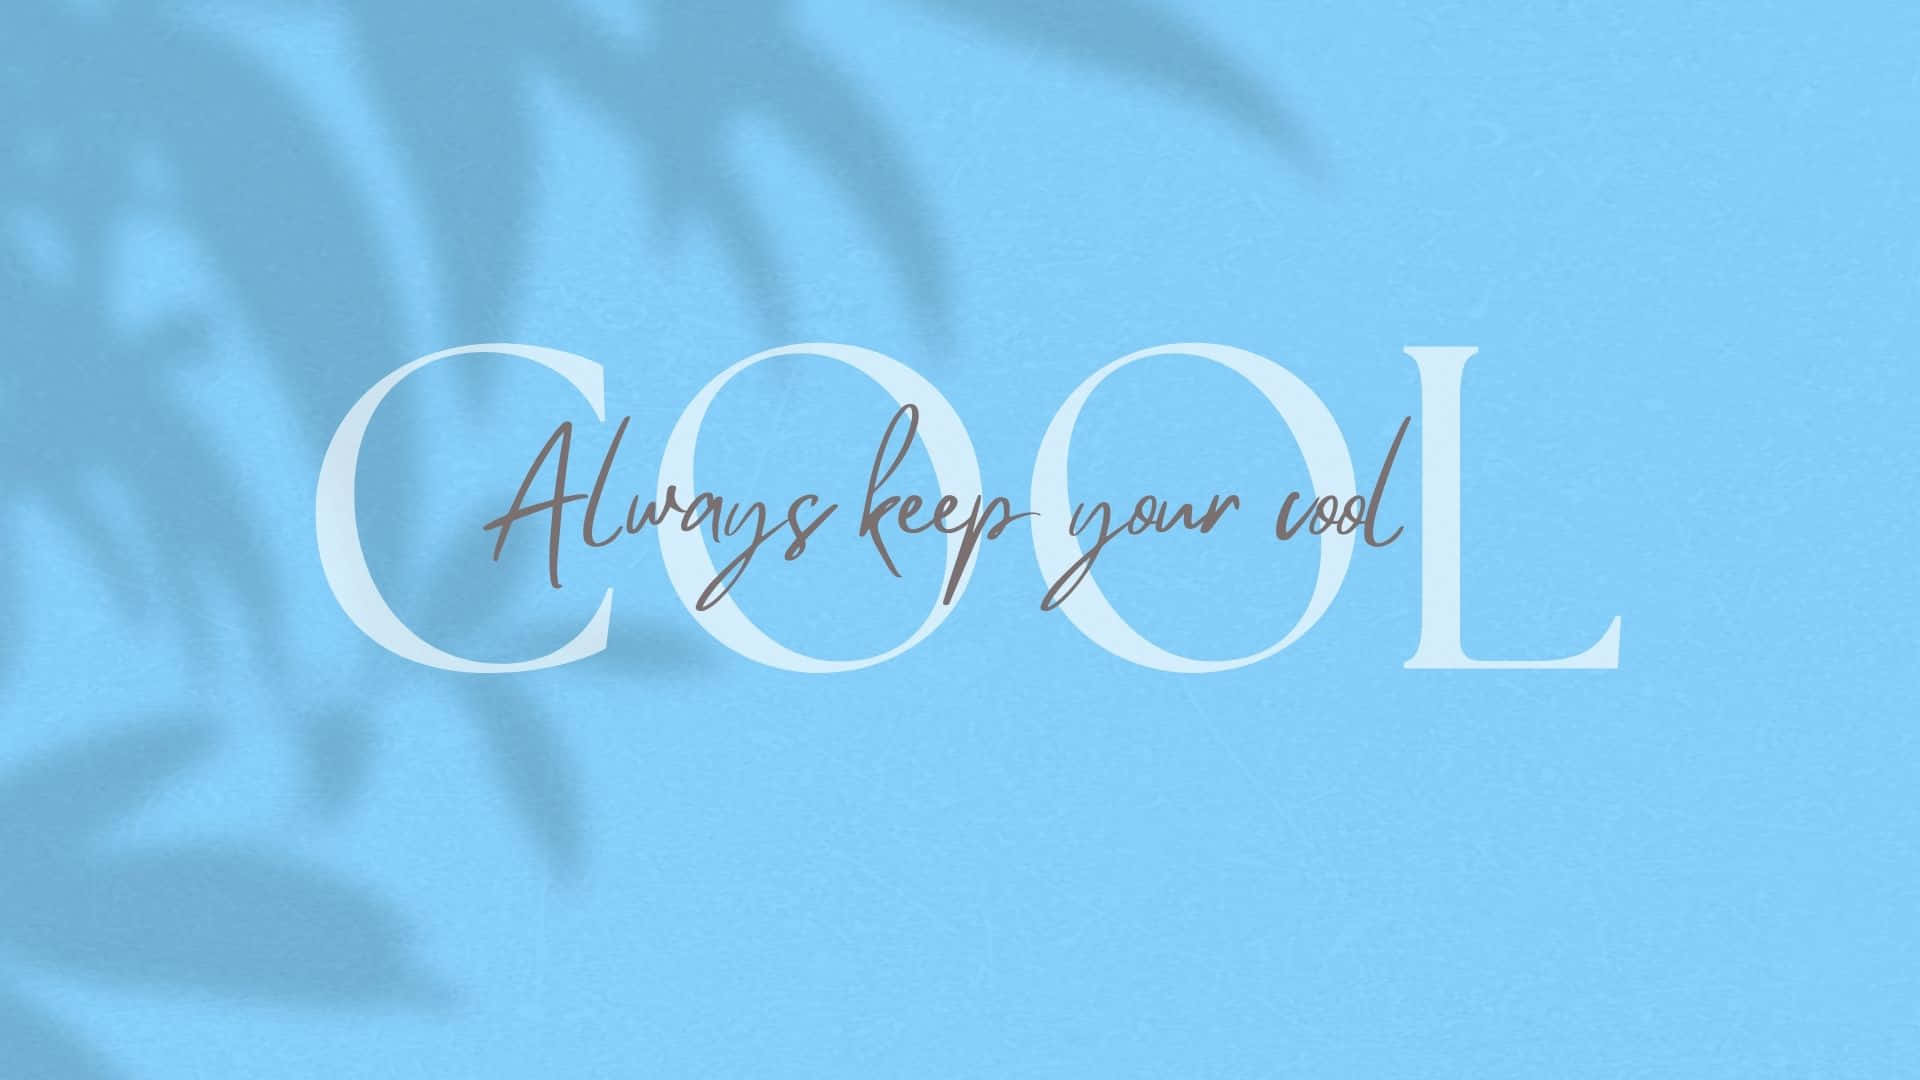 Stay chill and keep it cool Wallpaper